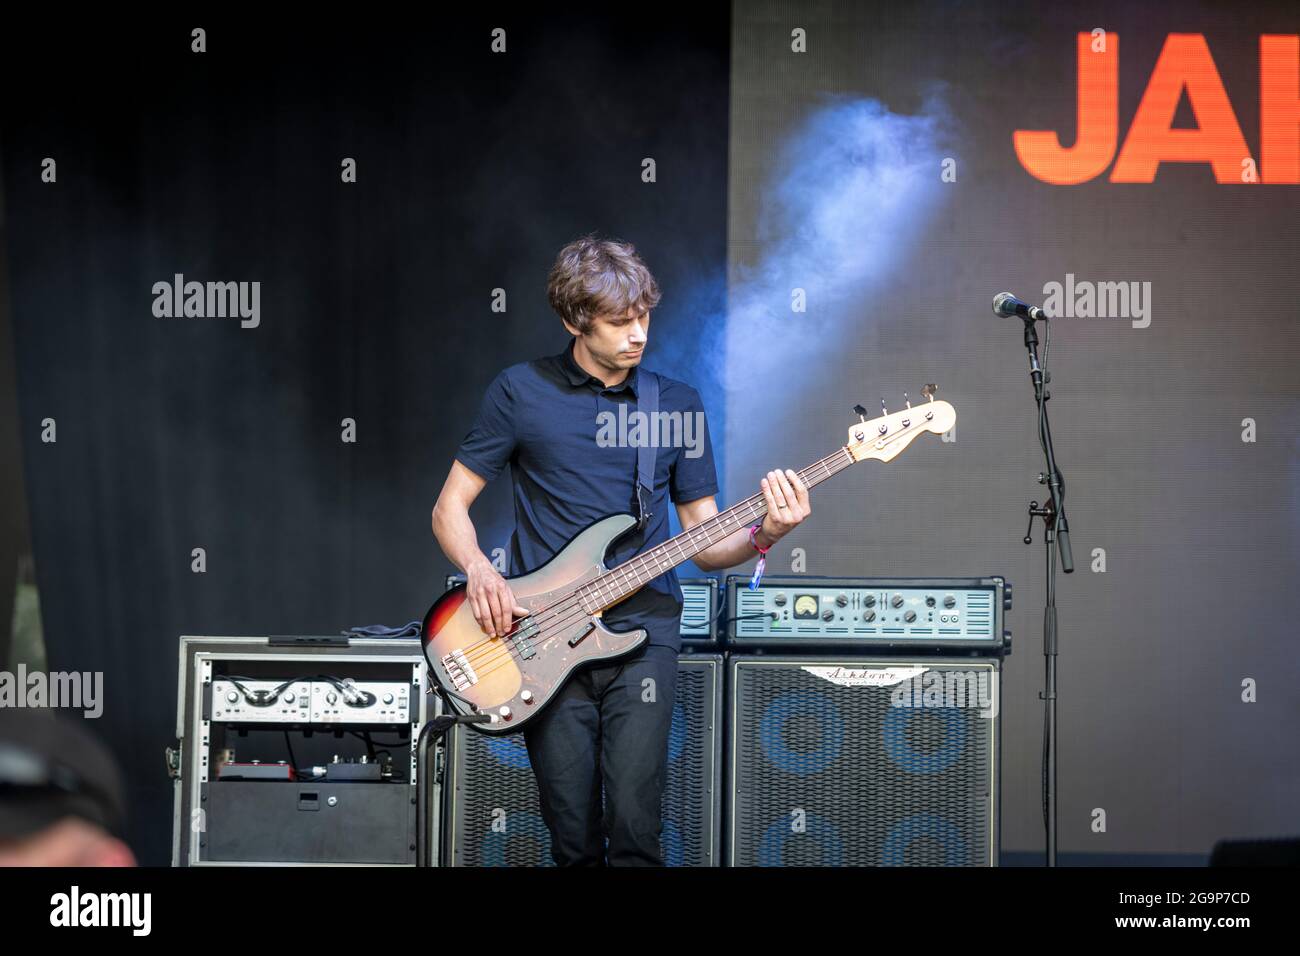 Tom Robertson bass player with the Jake Bugg band at Standon Calling music festival 2021 Hertfordshire UK Stock Photo